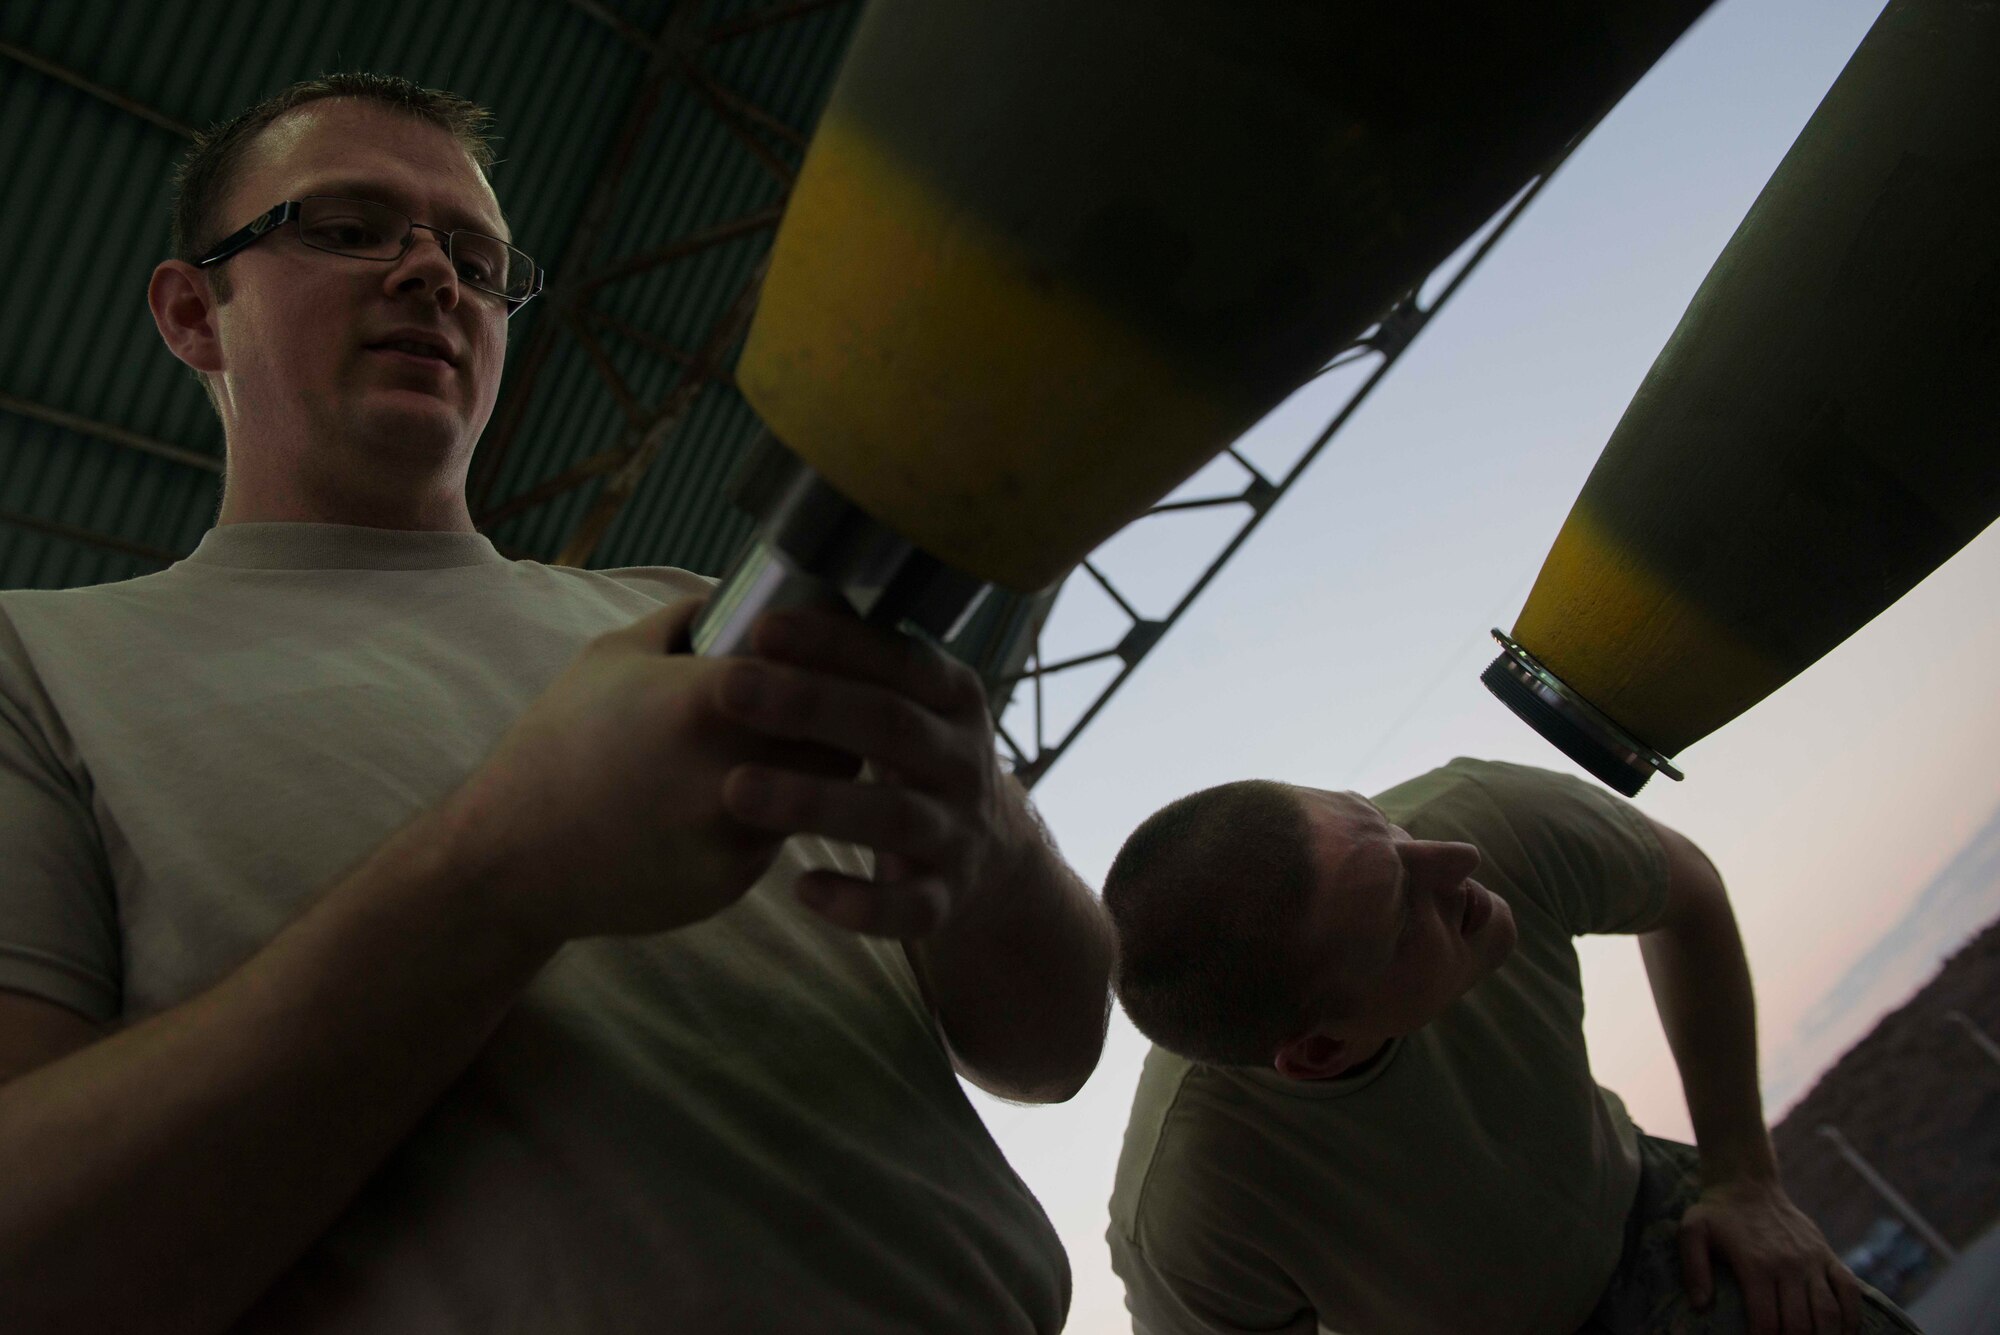 U.S. Air Force Tech. Sgt. Andrew Danielson (left) and Staff Sgt. Shadrach Mchargue, 447th Expeditionary Aircraft Maintenance Squadron munitions systems specialists, prepare GBU-12 Paveway II laser-guided bombs for transport Aug. 8, 2016, at Incirlik Air Base, Turkey. Upon completion, munitions are transported to either aircraft or storage. (U.S. Air Force photo by Senior Airman John Nieves Camacho)